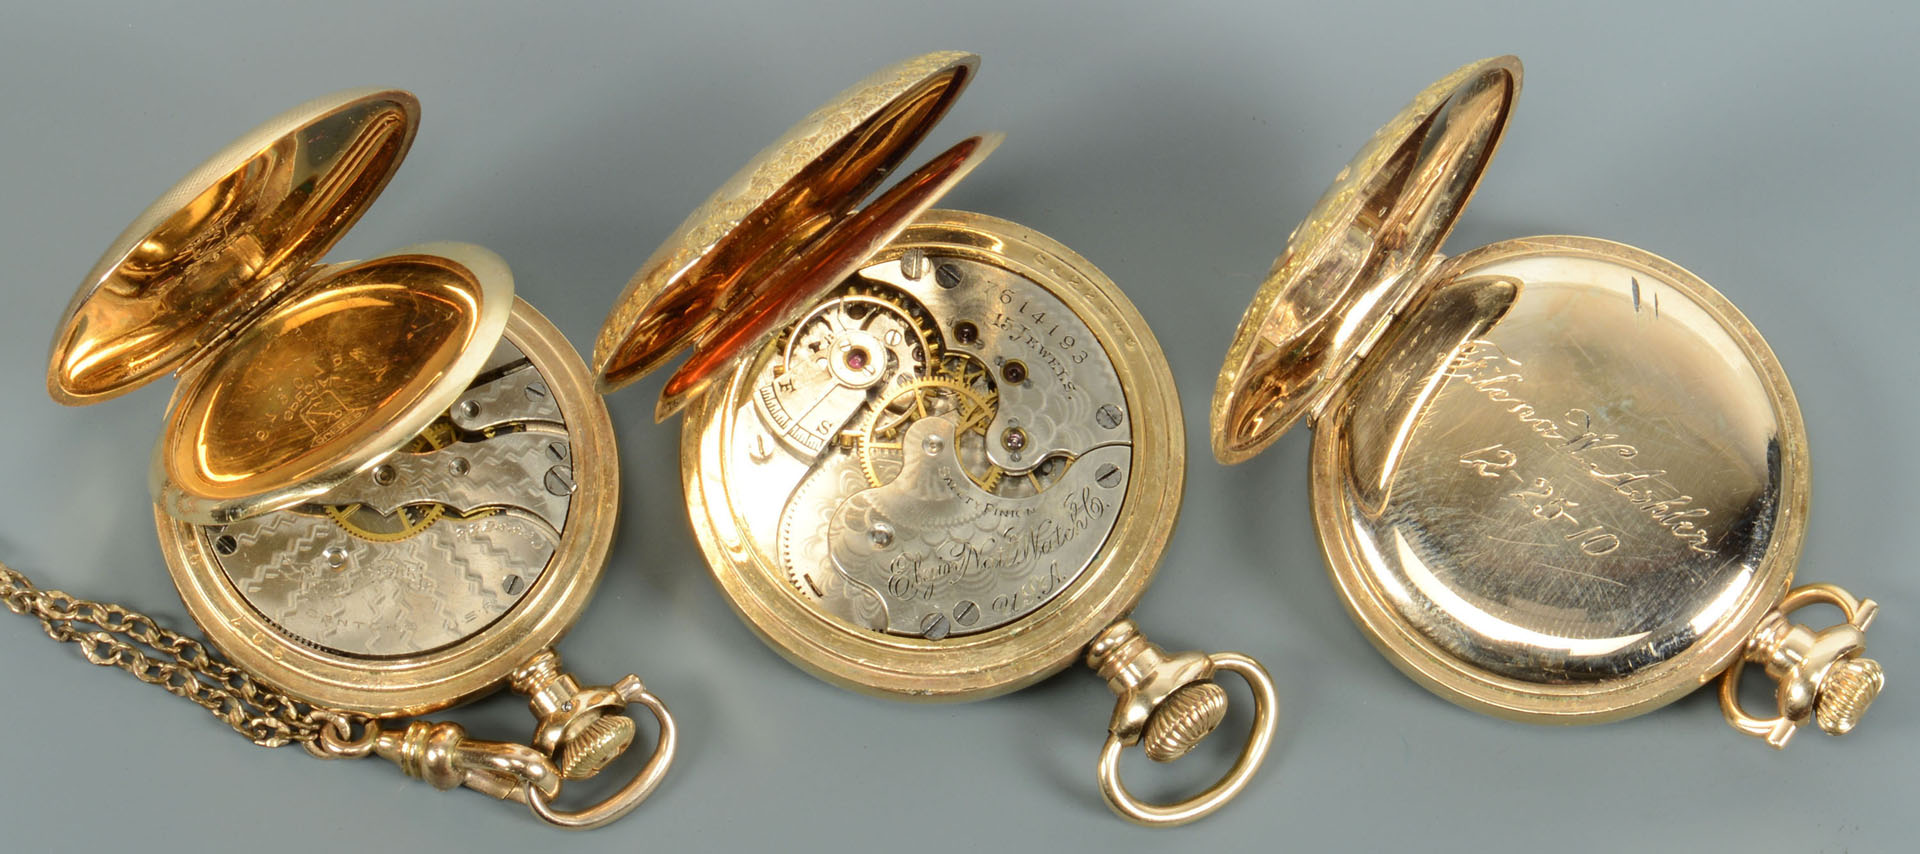 Lot 743: Group of 7 pocket watches, inc 14K Omega